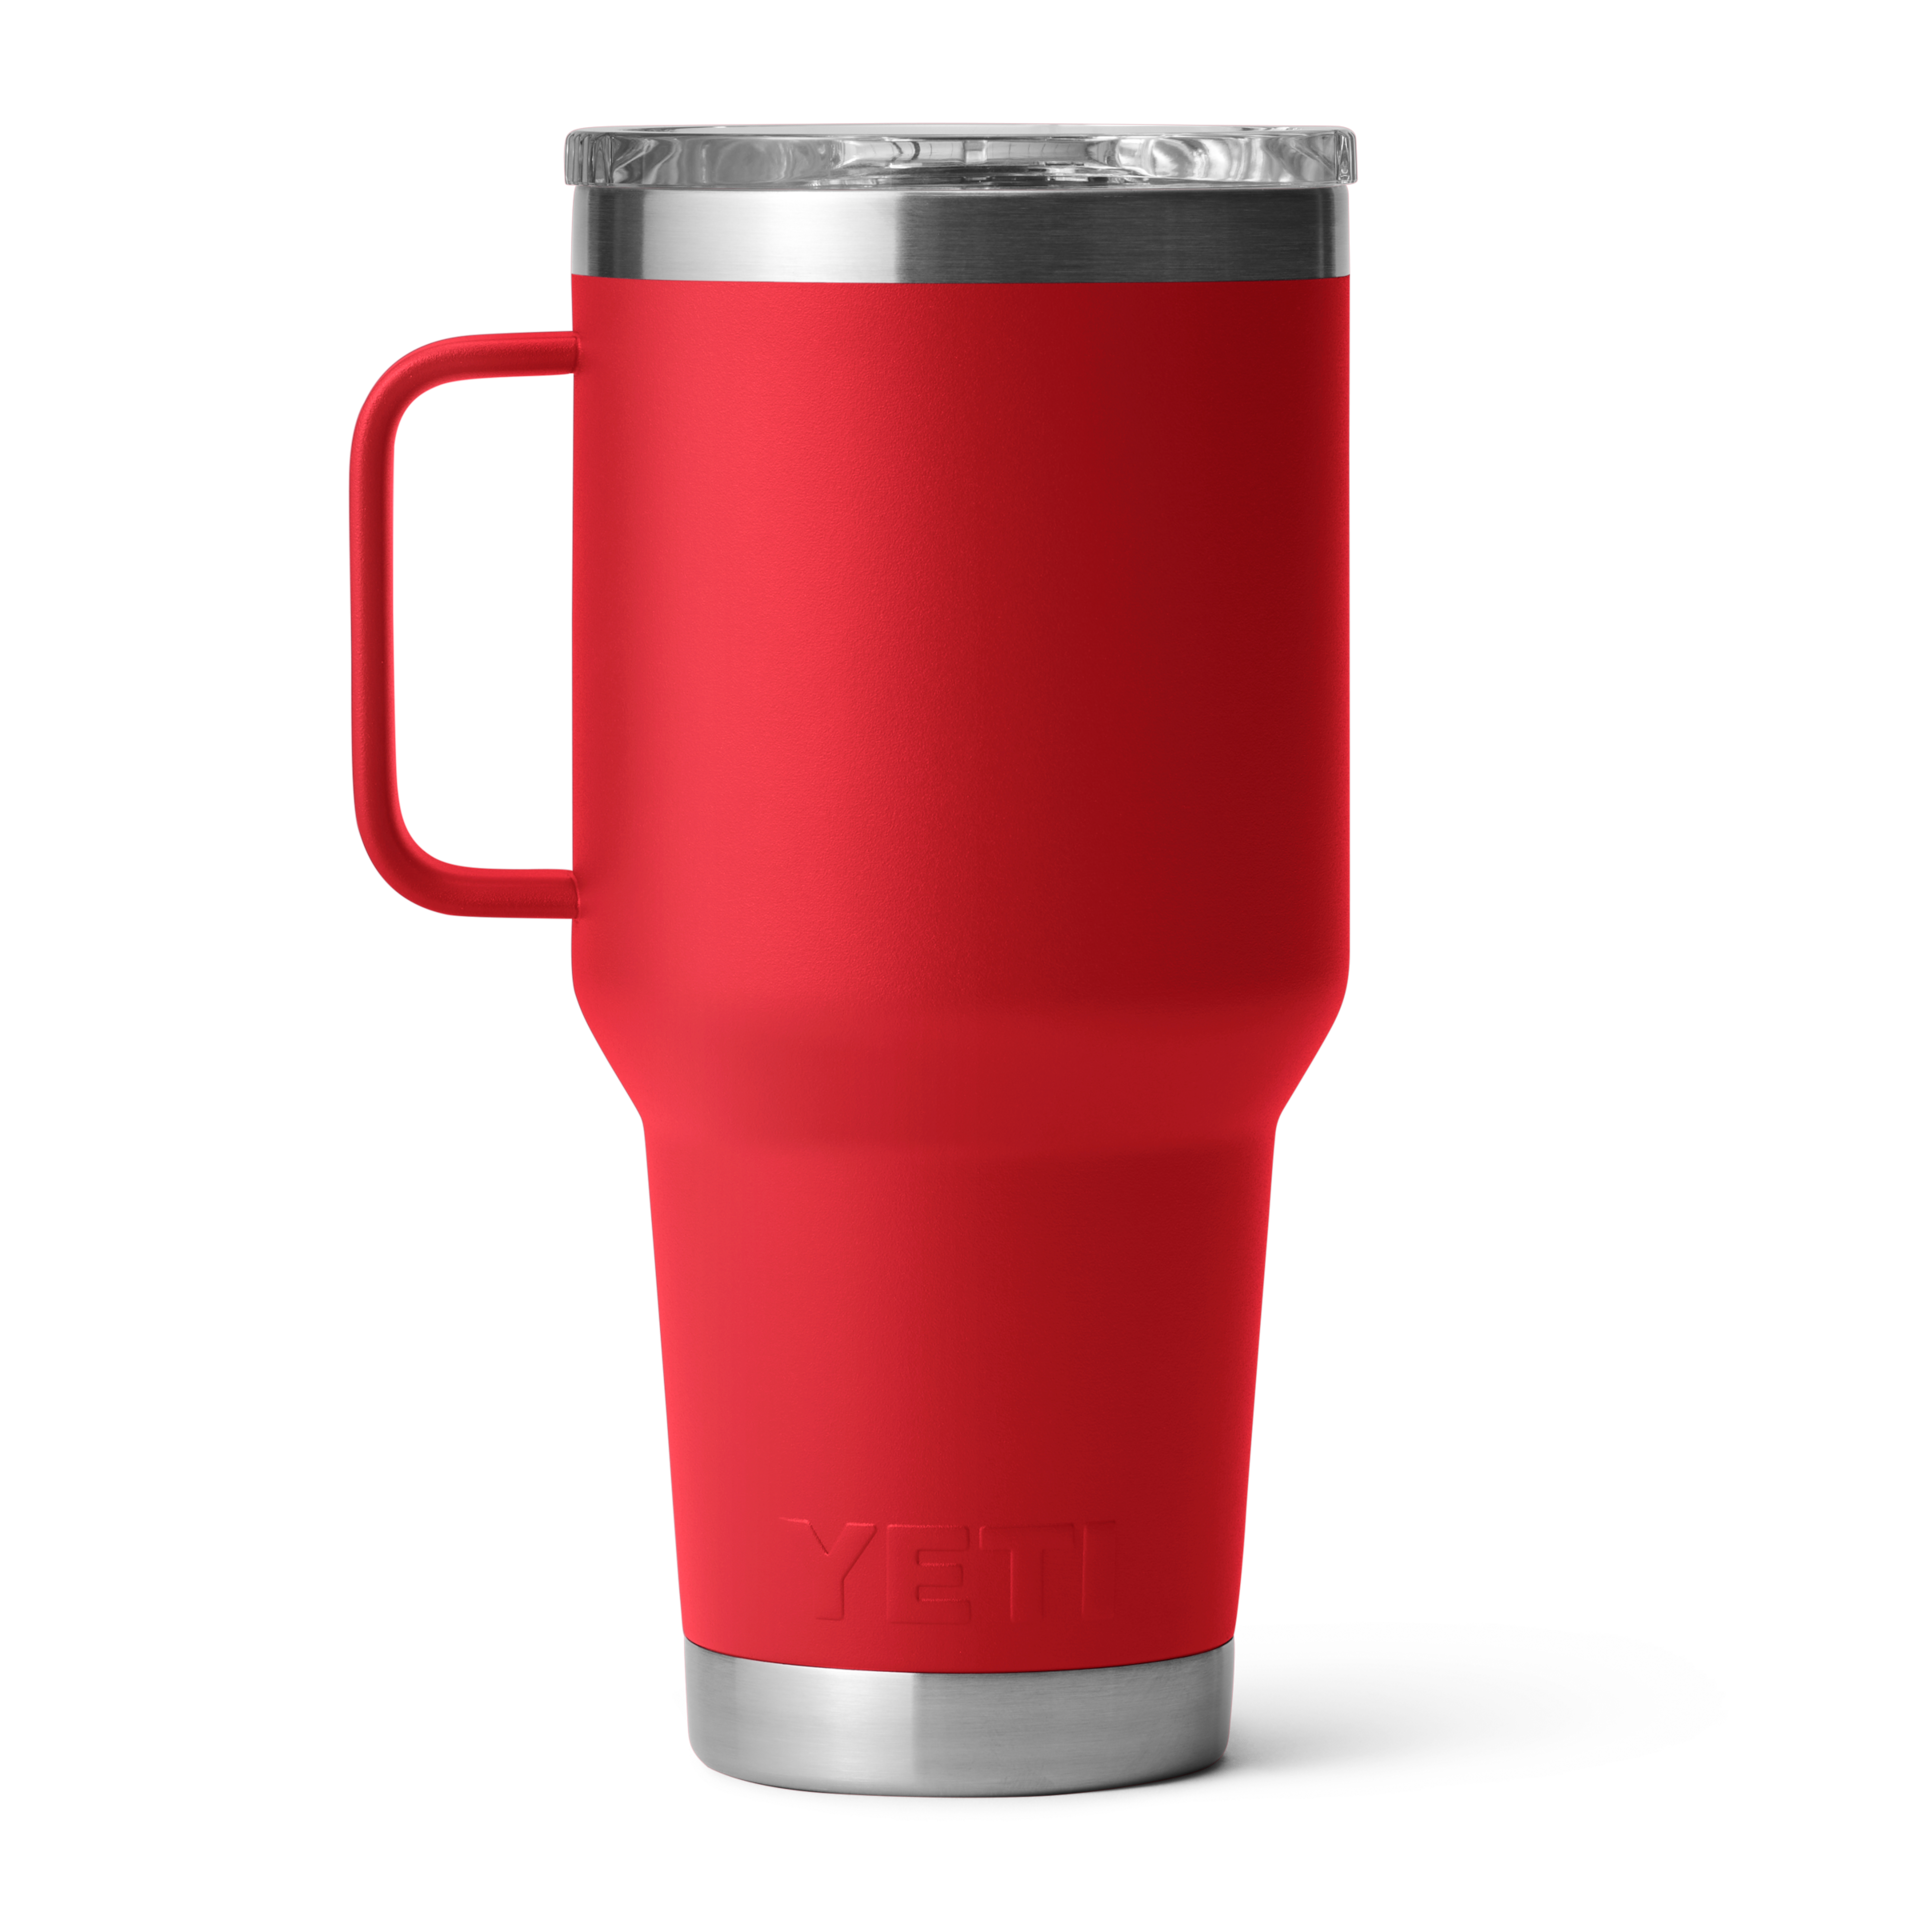 30 oz. / 887ml Travel Mug w/ Stronghold Lid - Rescue Red